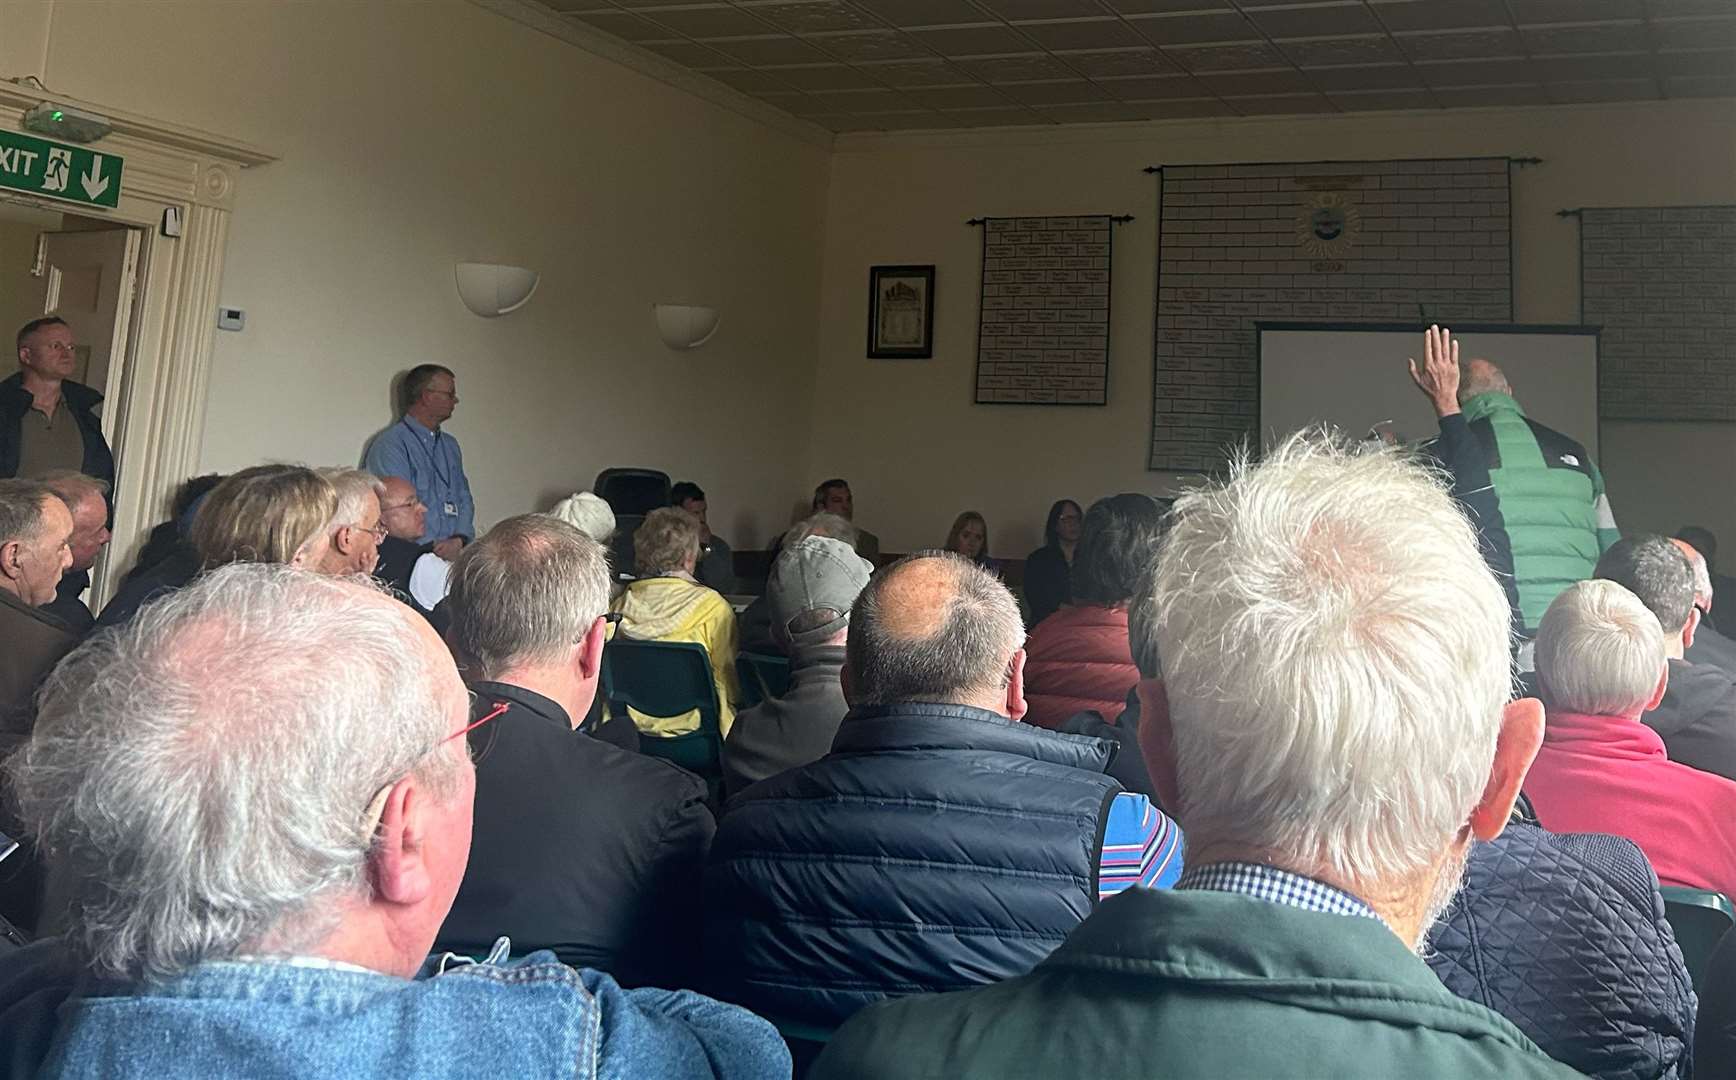 About 100 residents attended the water quality meeting in New Romney